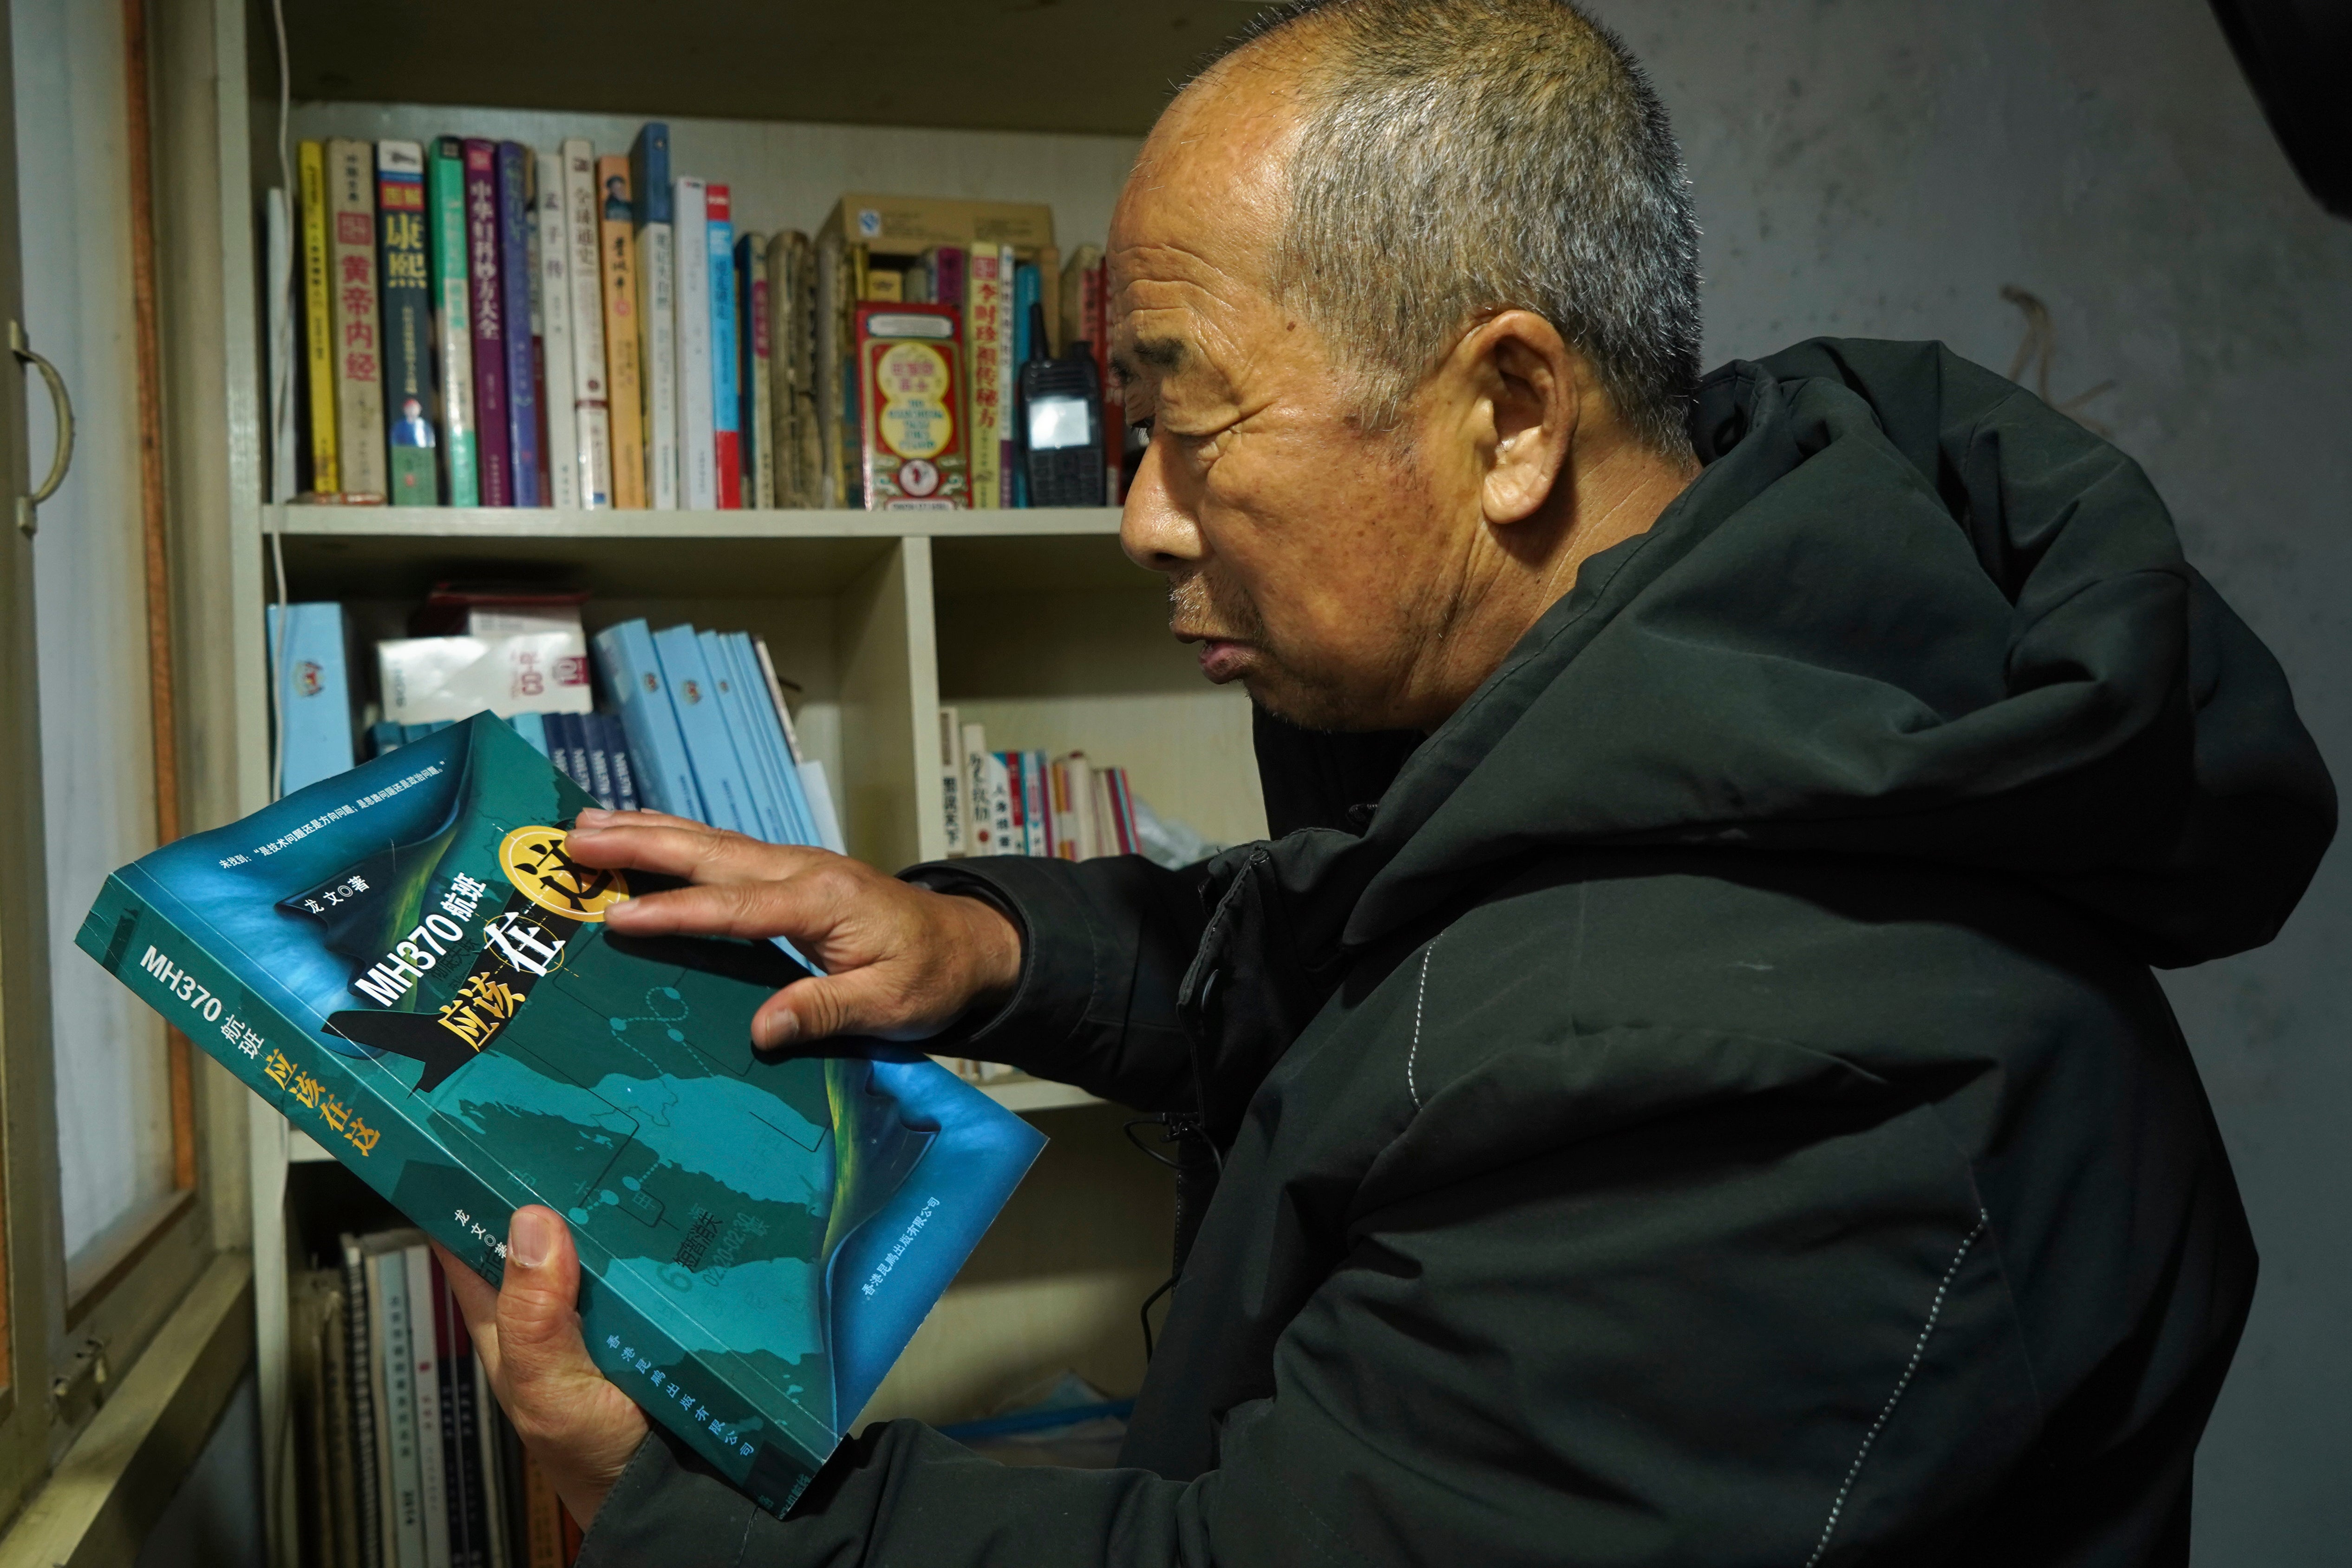 Chinese farmer Li Eryou looks at a book written about the missing Malaysia Airlines MH370 flight from a bookshelf of his son's former room at a village in Handan in northern China's Hebei province